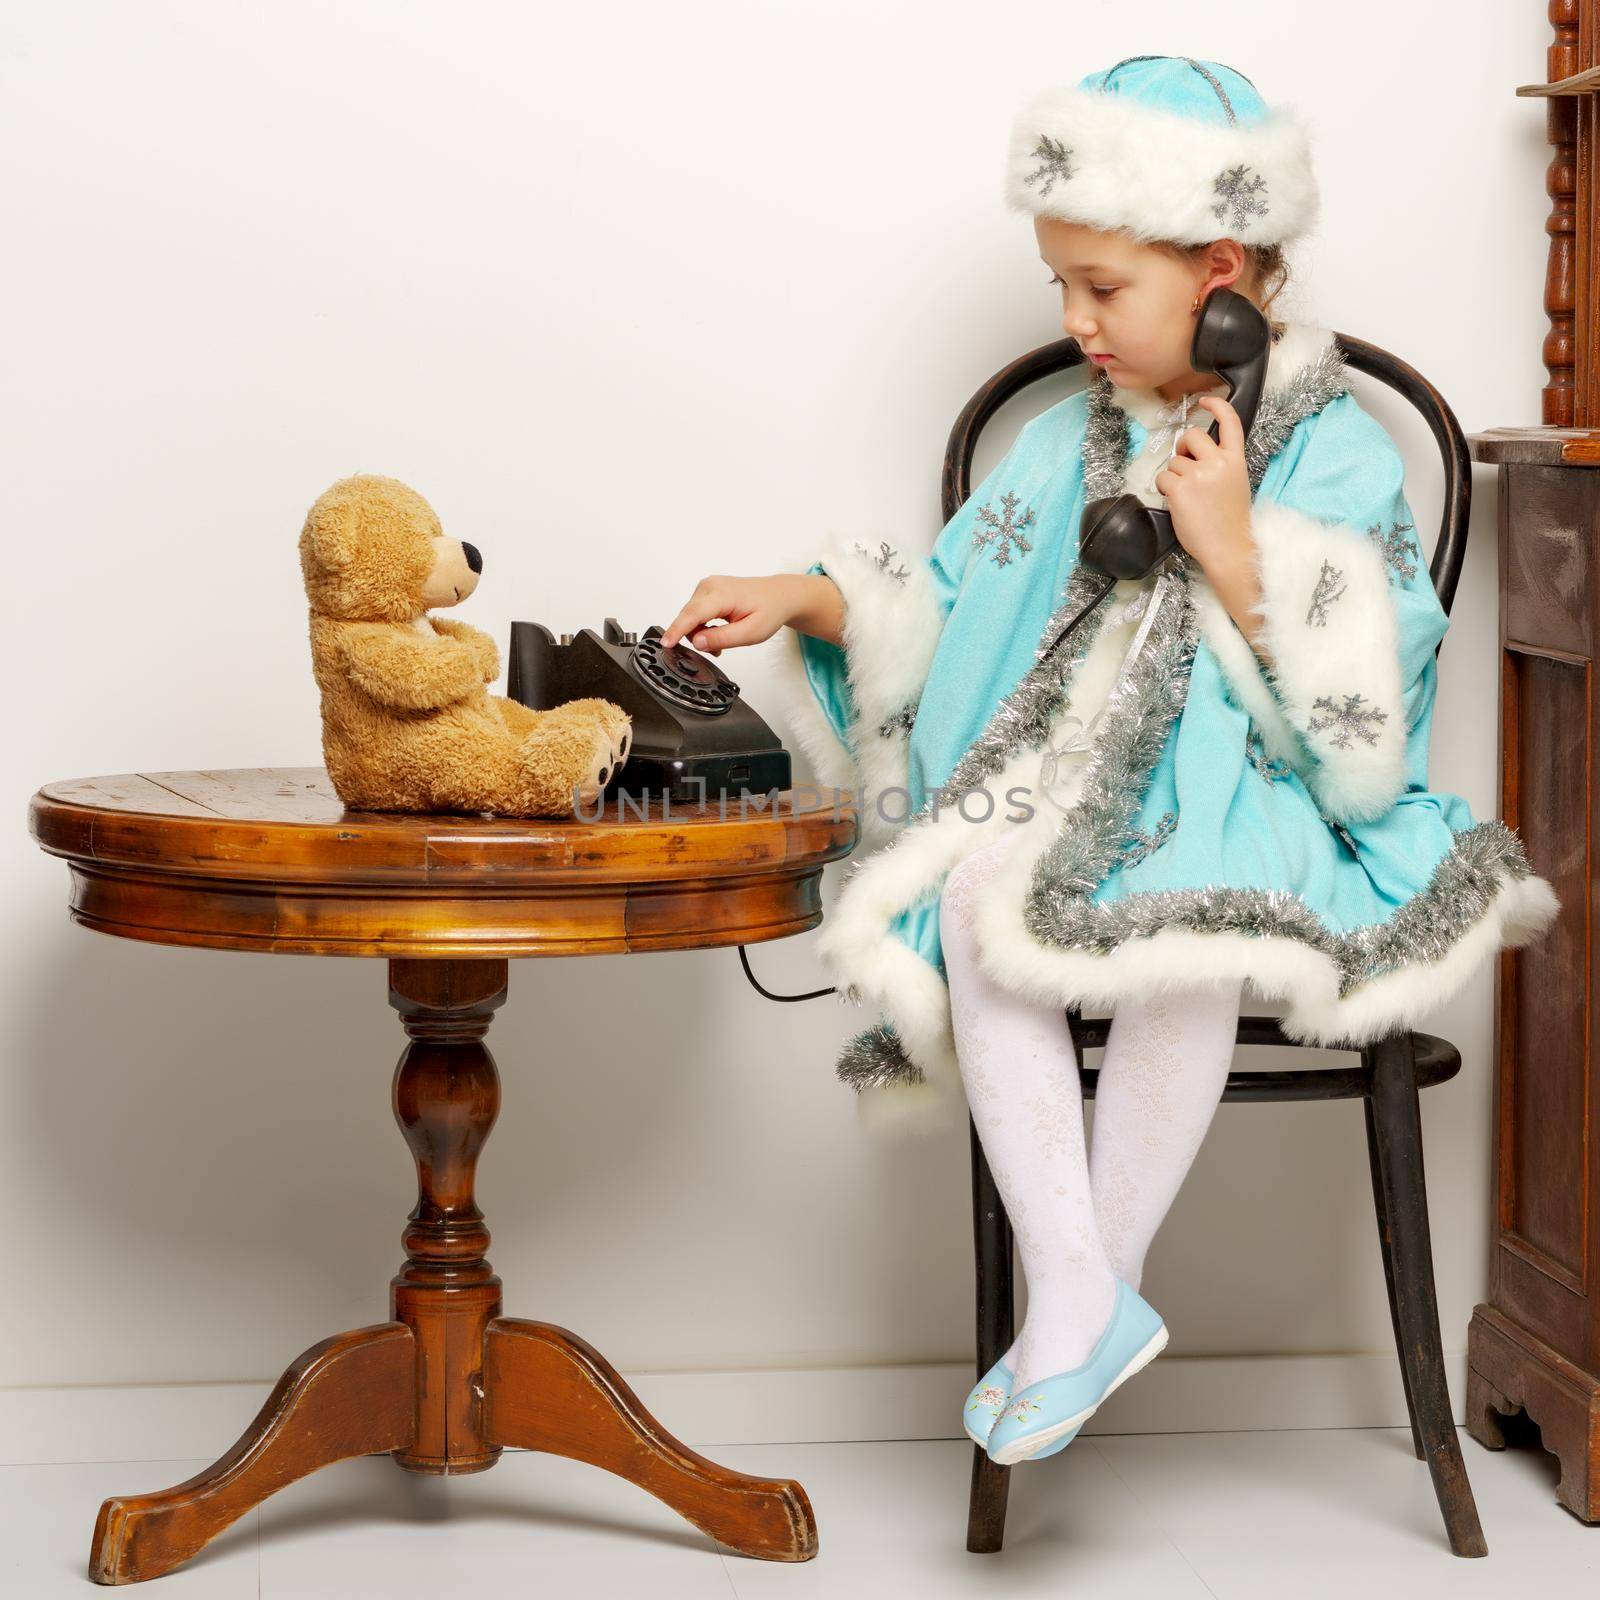 Cute little girl in a snow maiden costume talking on the old phone. The concept of family holidays.